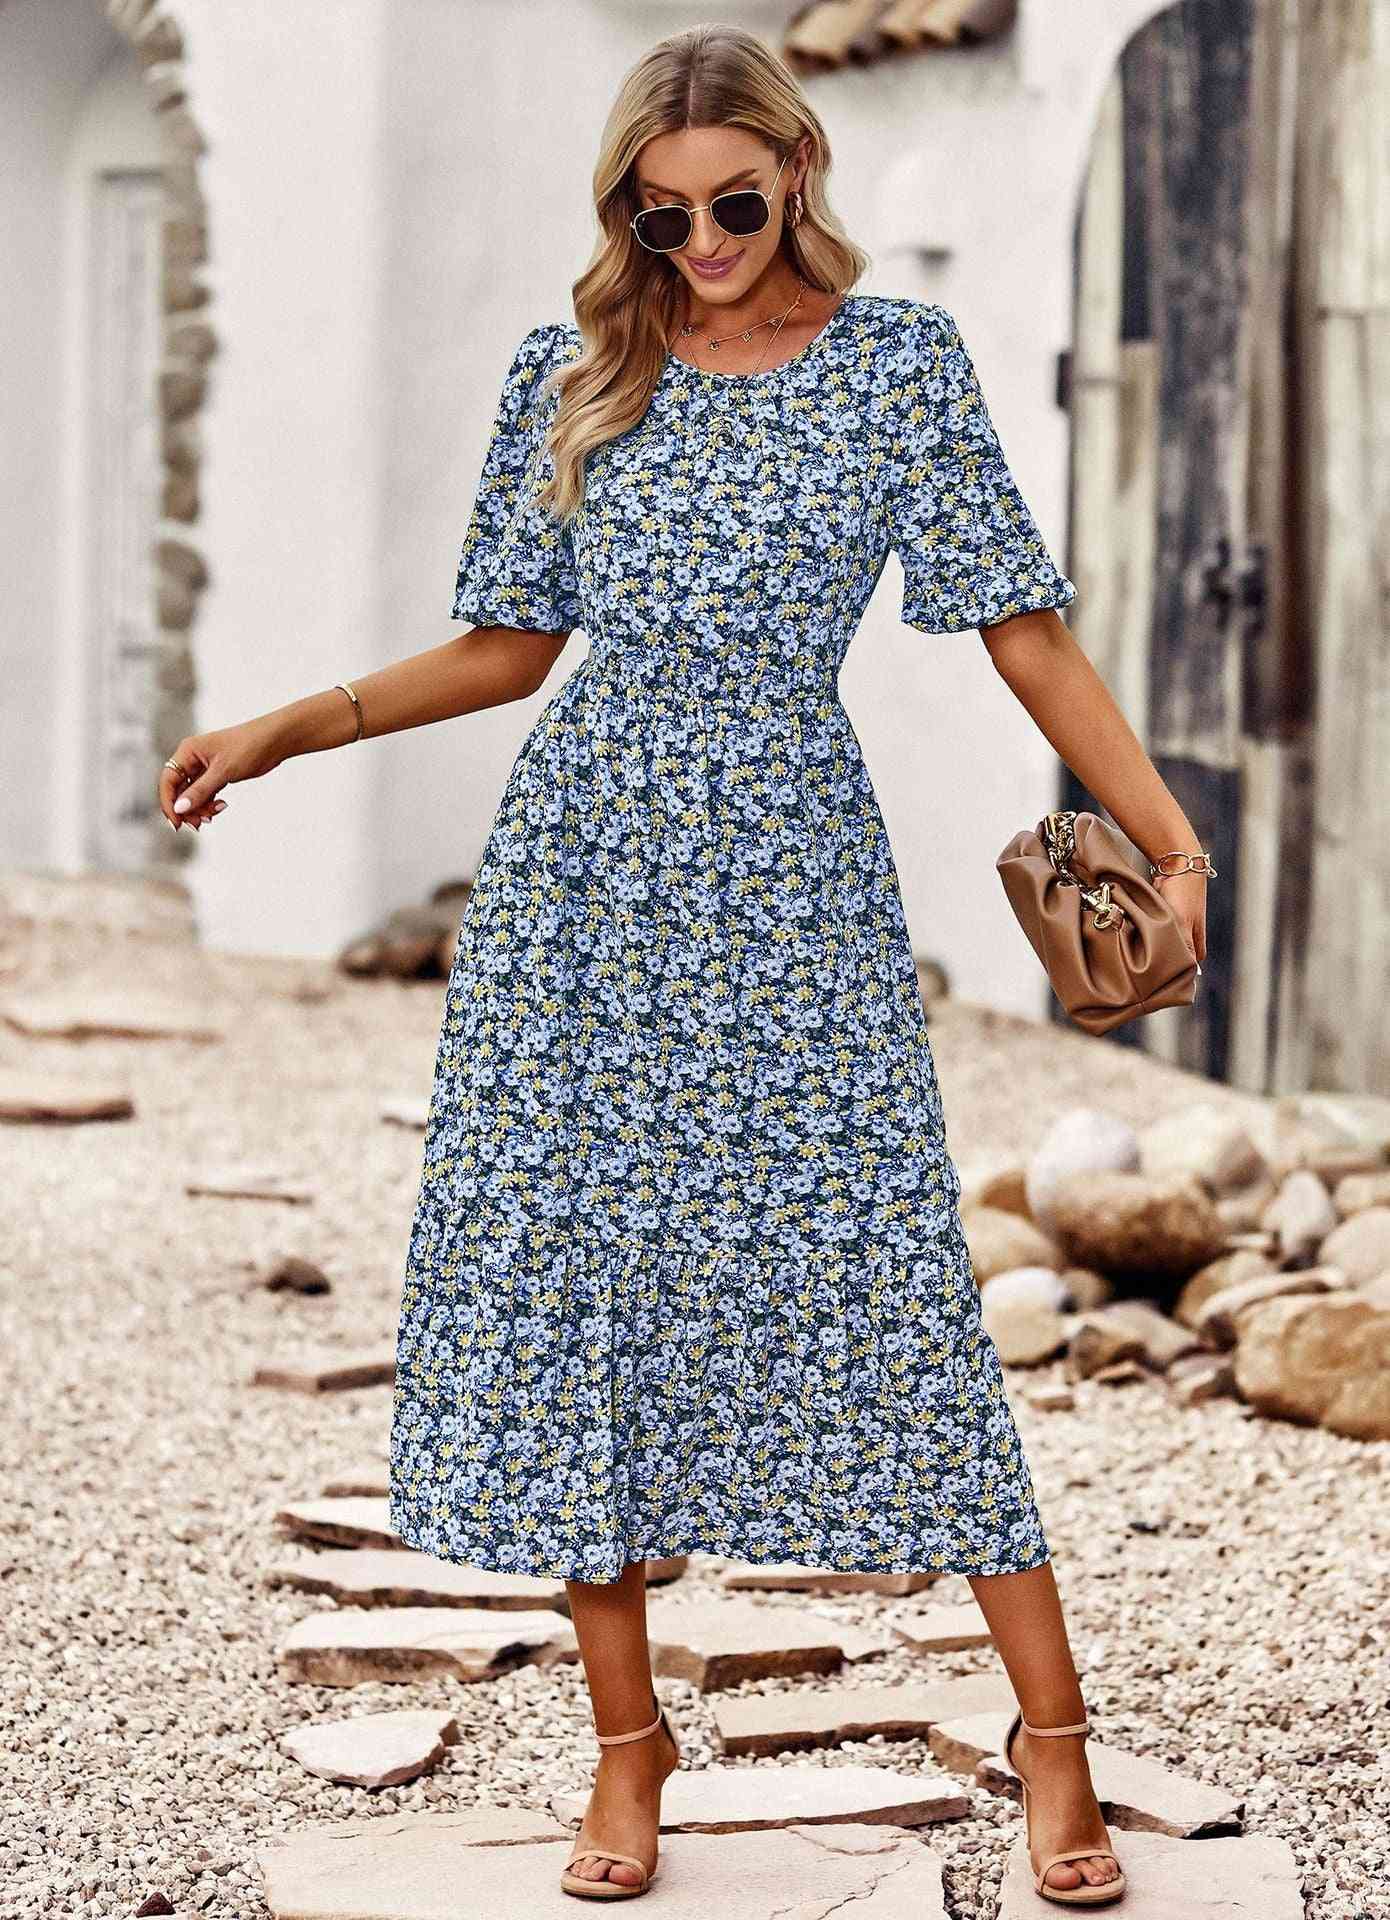 Fashion Round Neck Printed Dress - Trotters Independent Traders